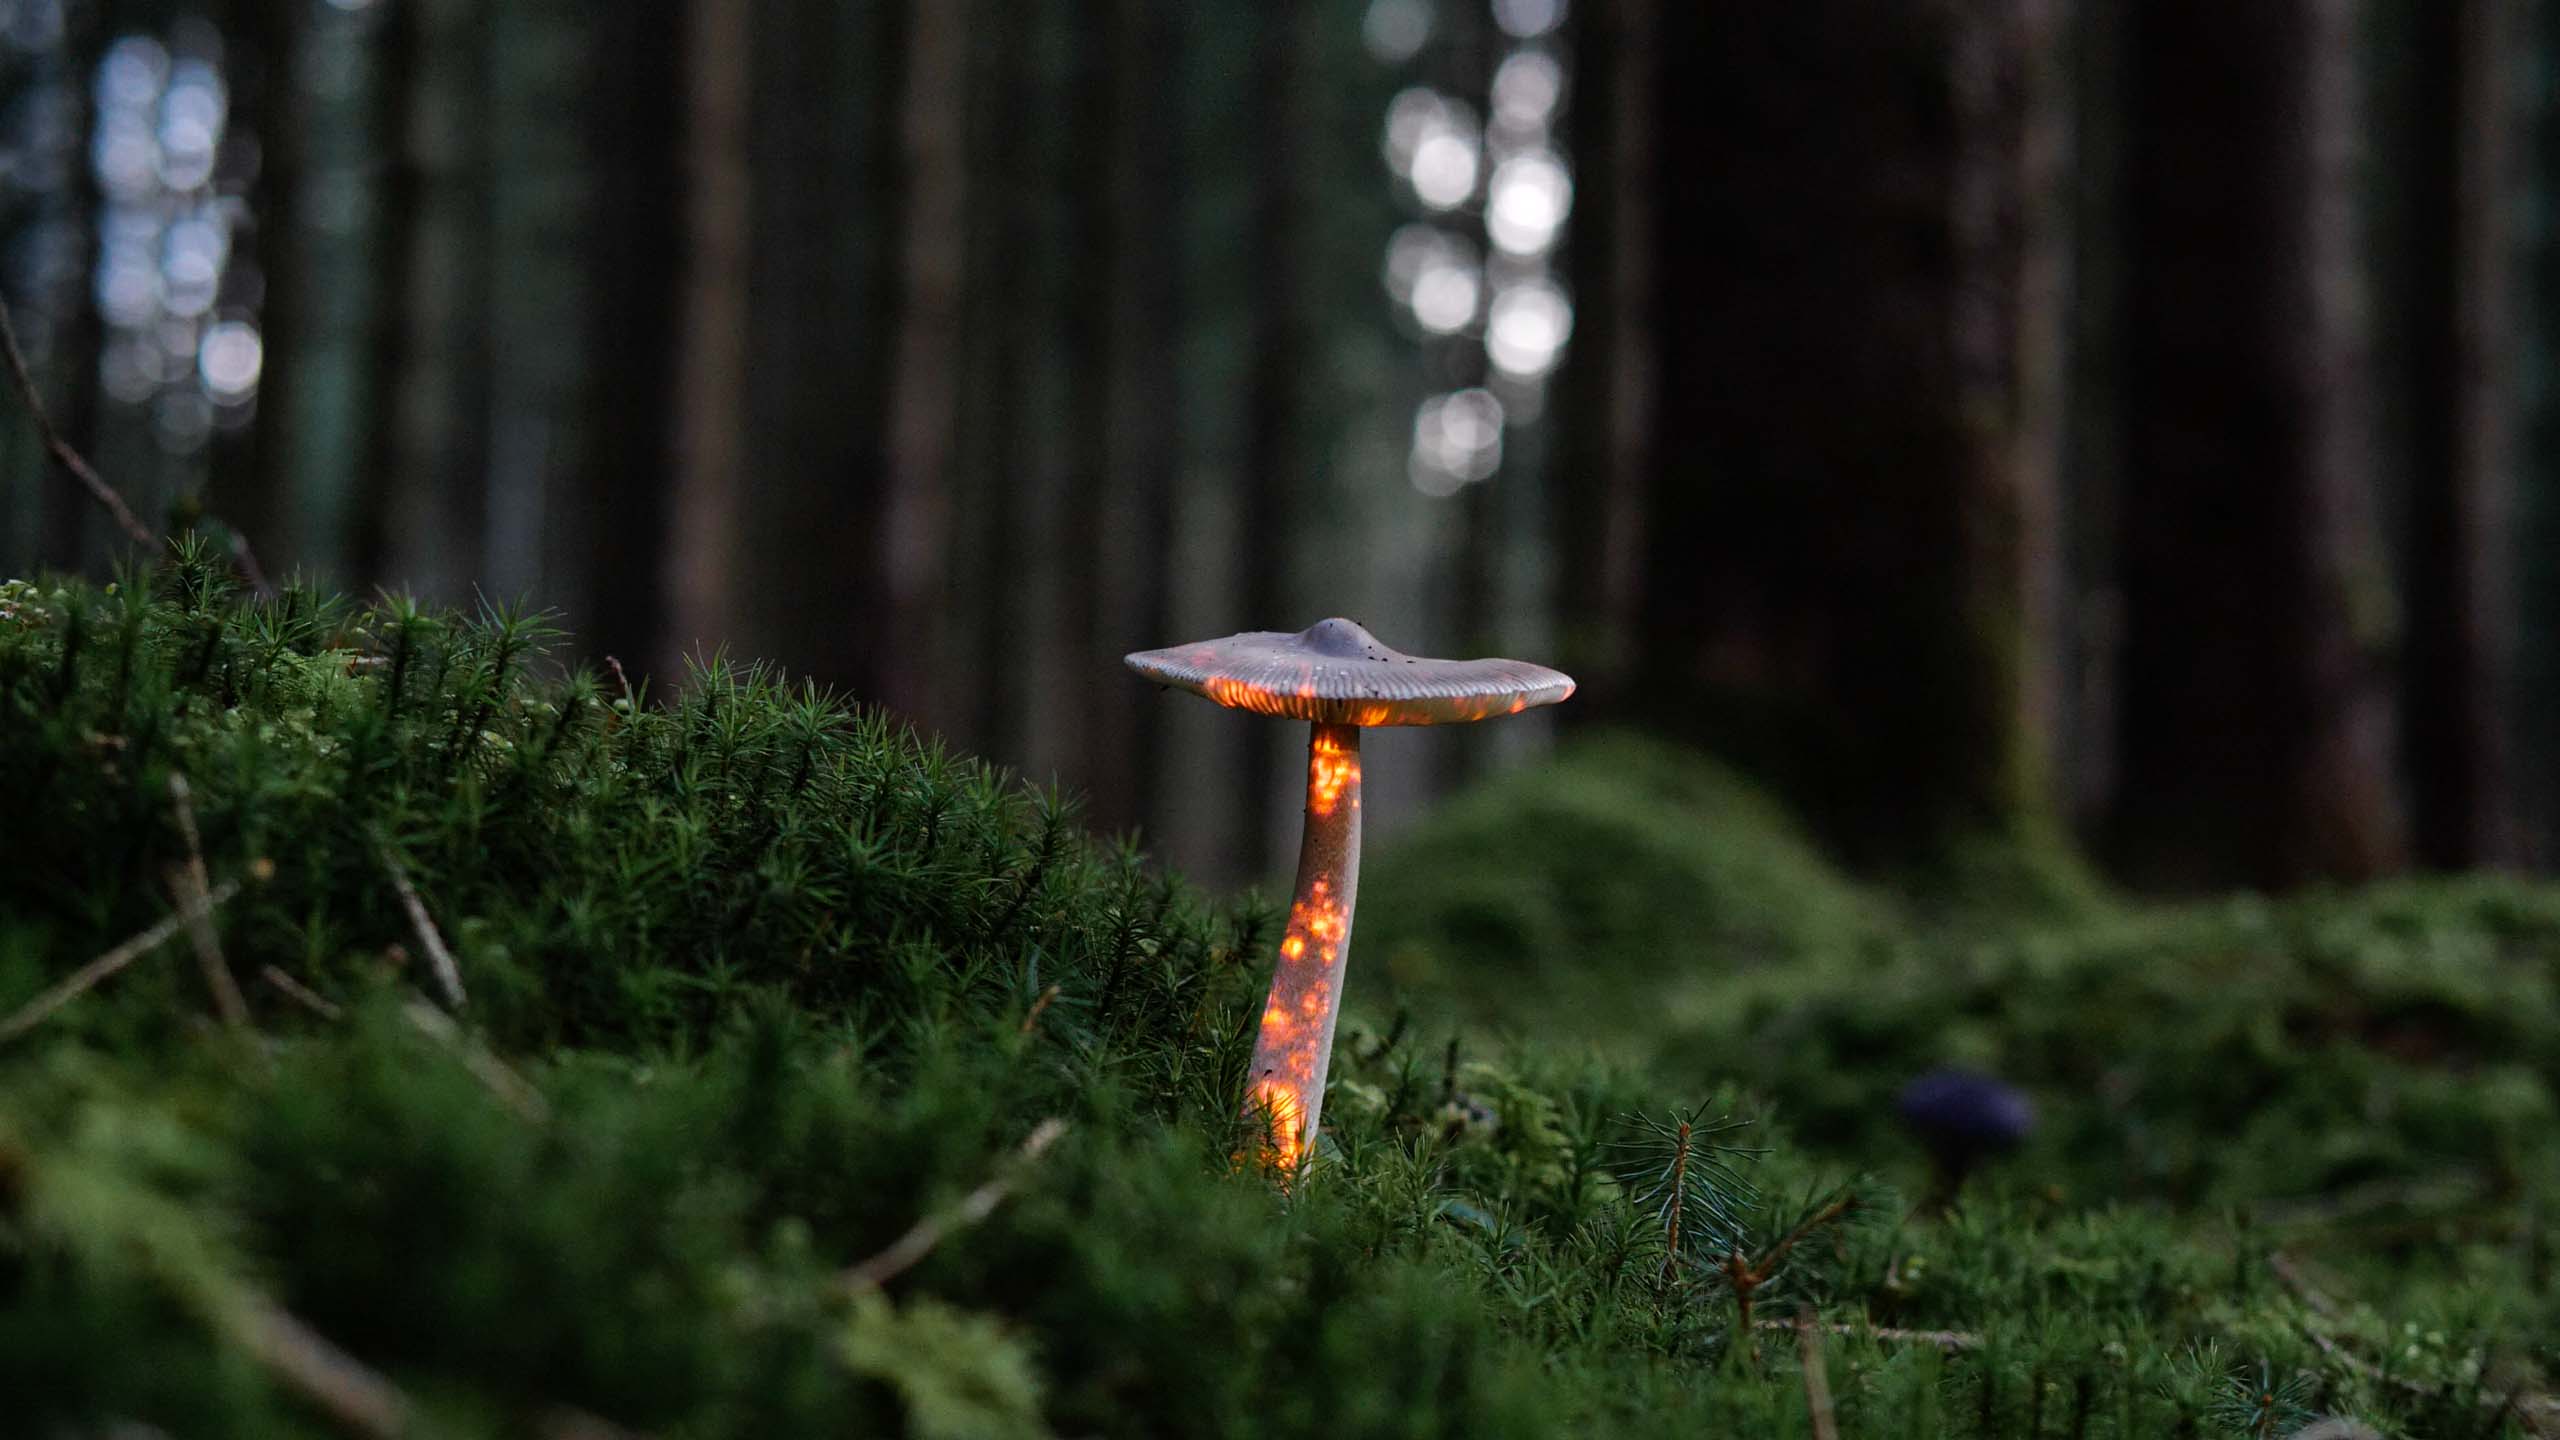 Projection mapping on a Mushroom